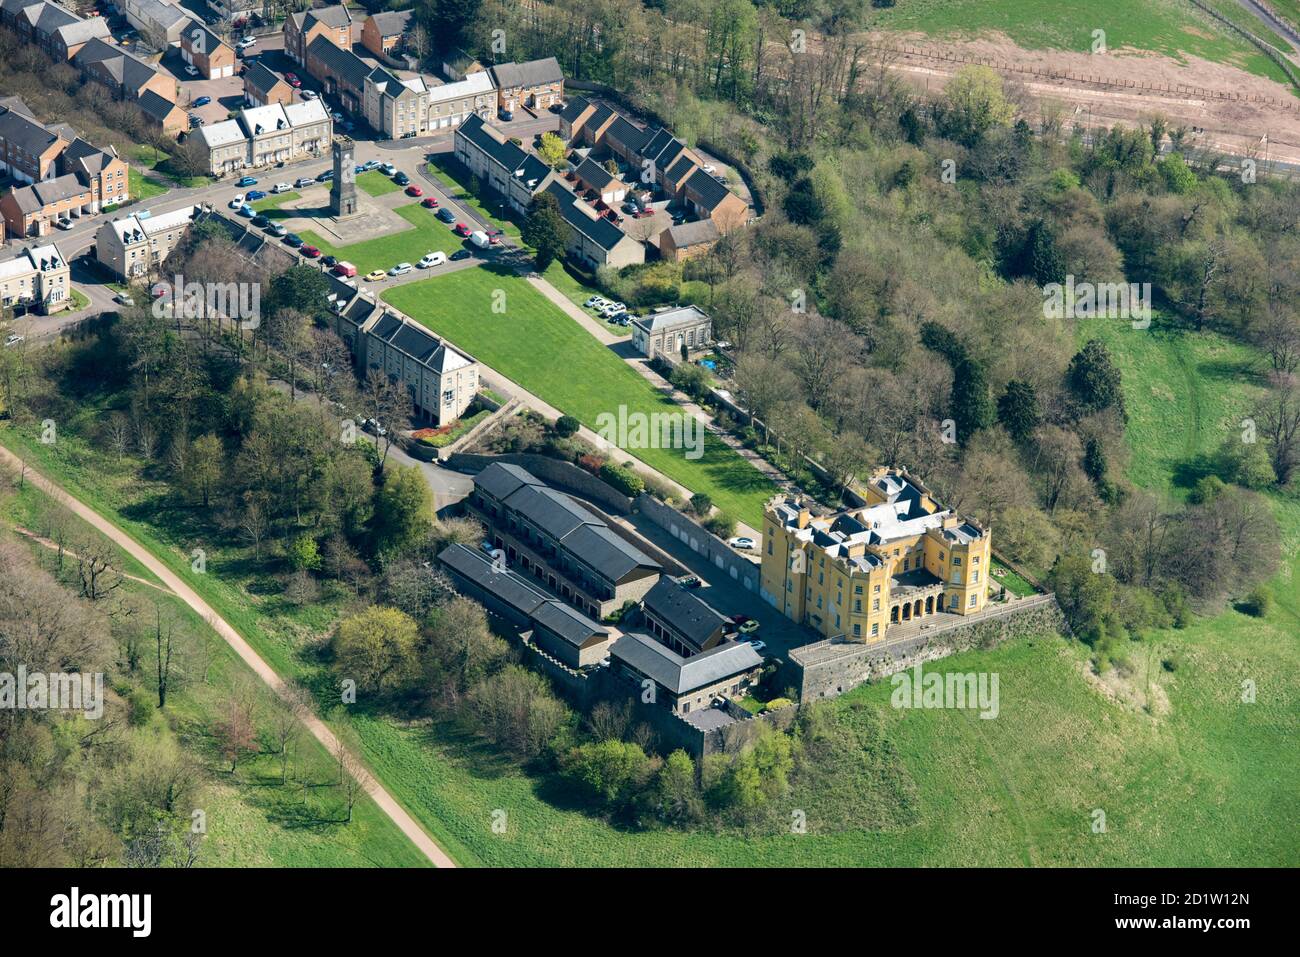 Former Dower House at Stoke Park, then became a Learning Disability Hospital from 1909 to 1988, converted into apartments in 2004 with New Housing in Hospital Grounds, Bristol, 2018, UK. Aerial view. Stock Photo